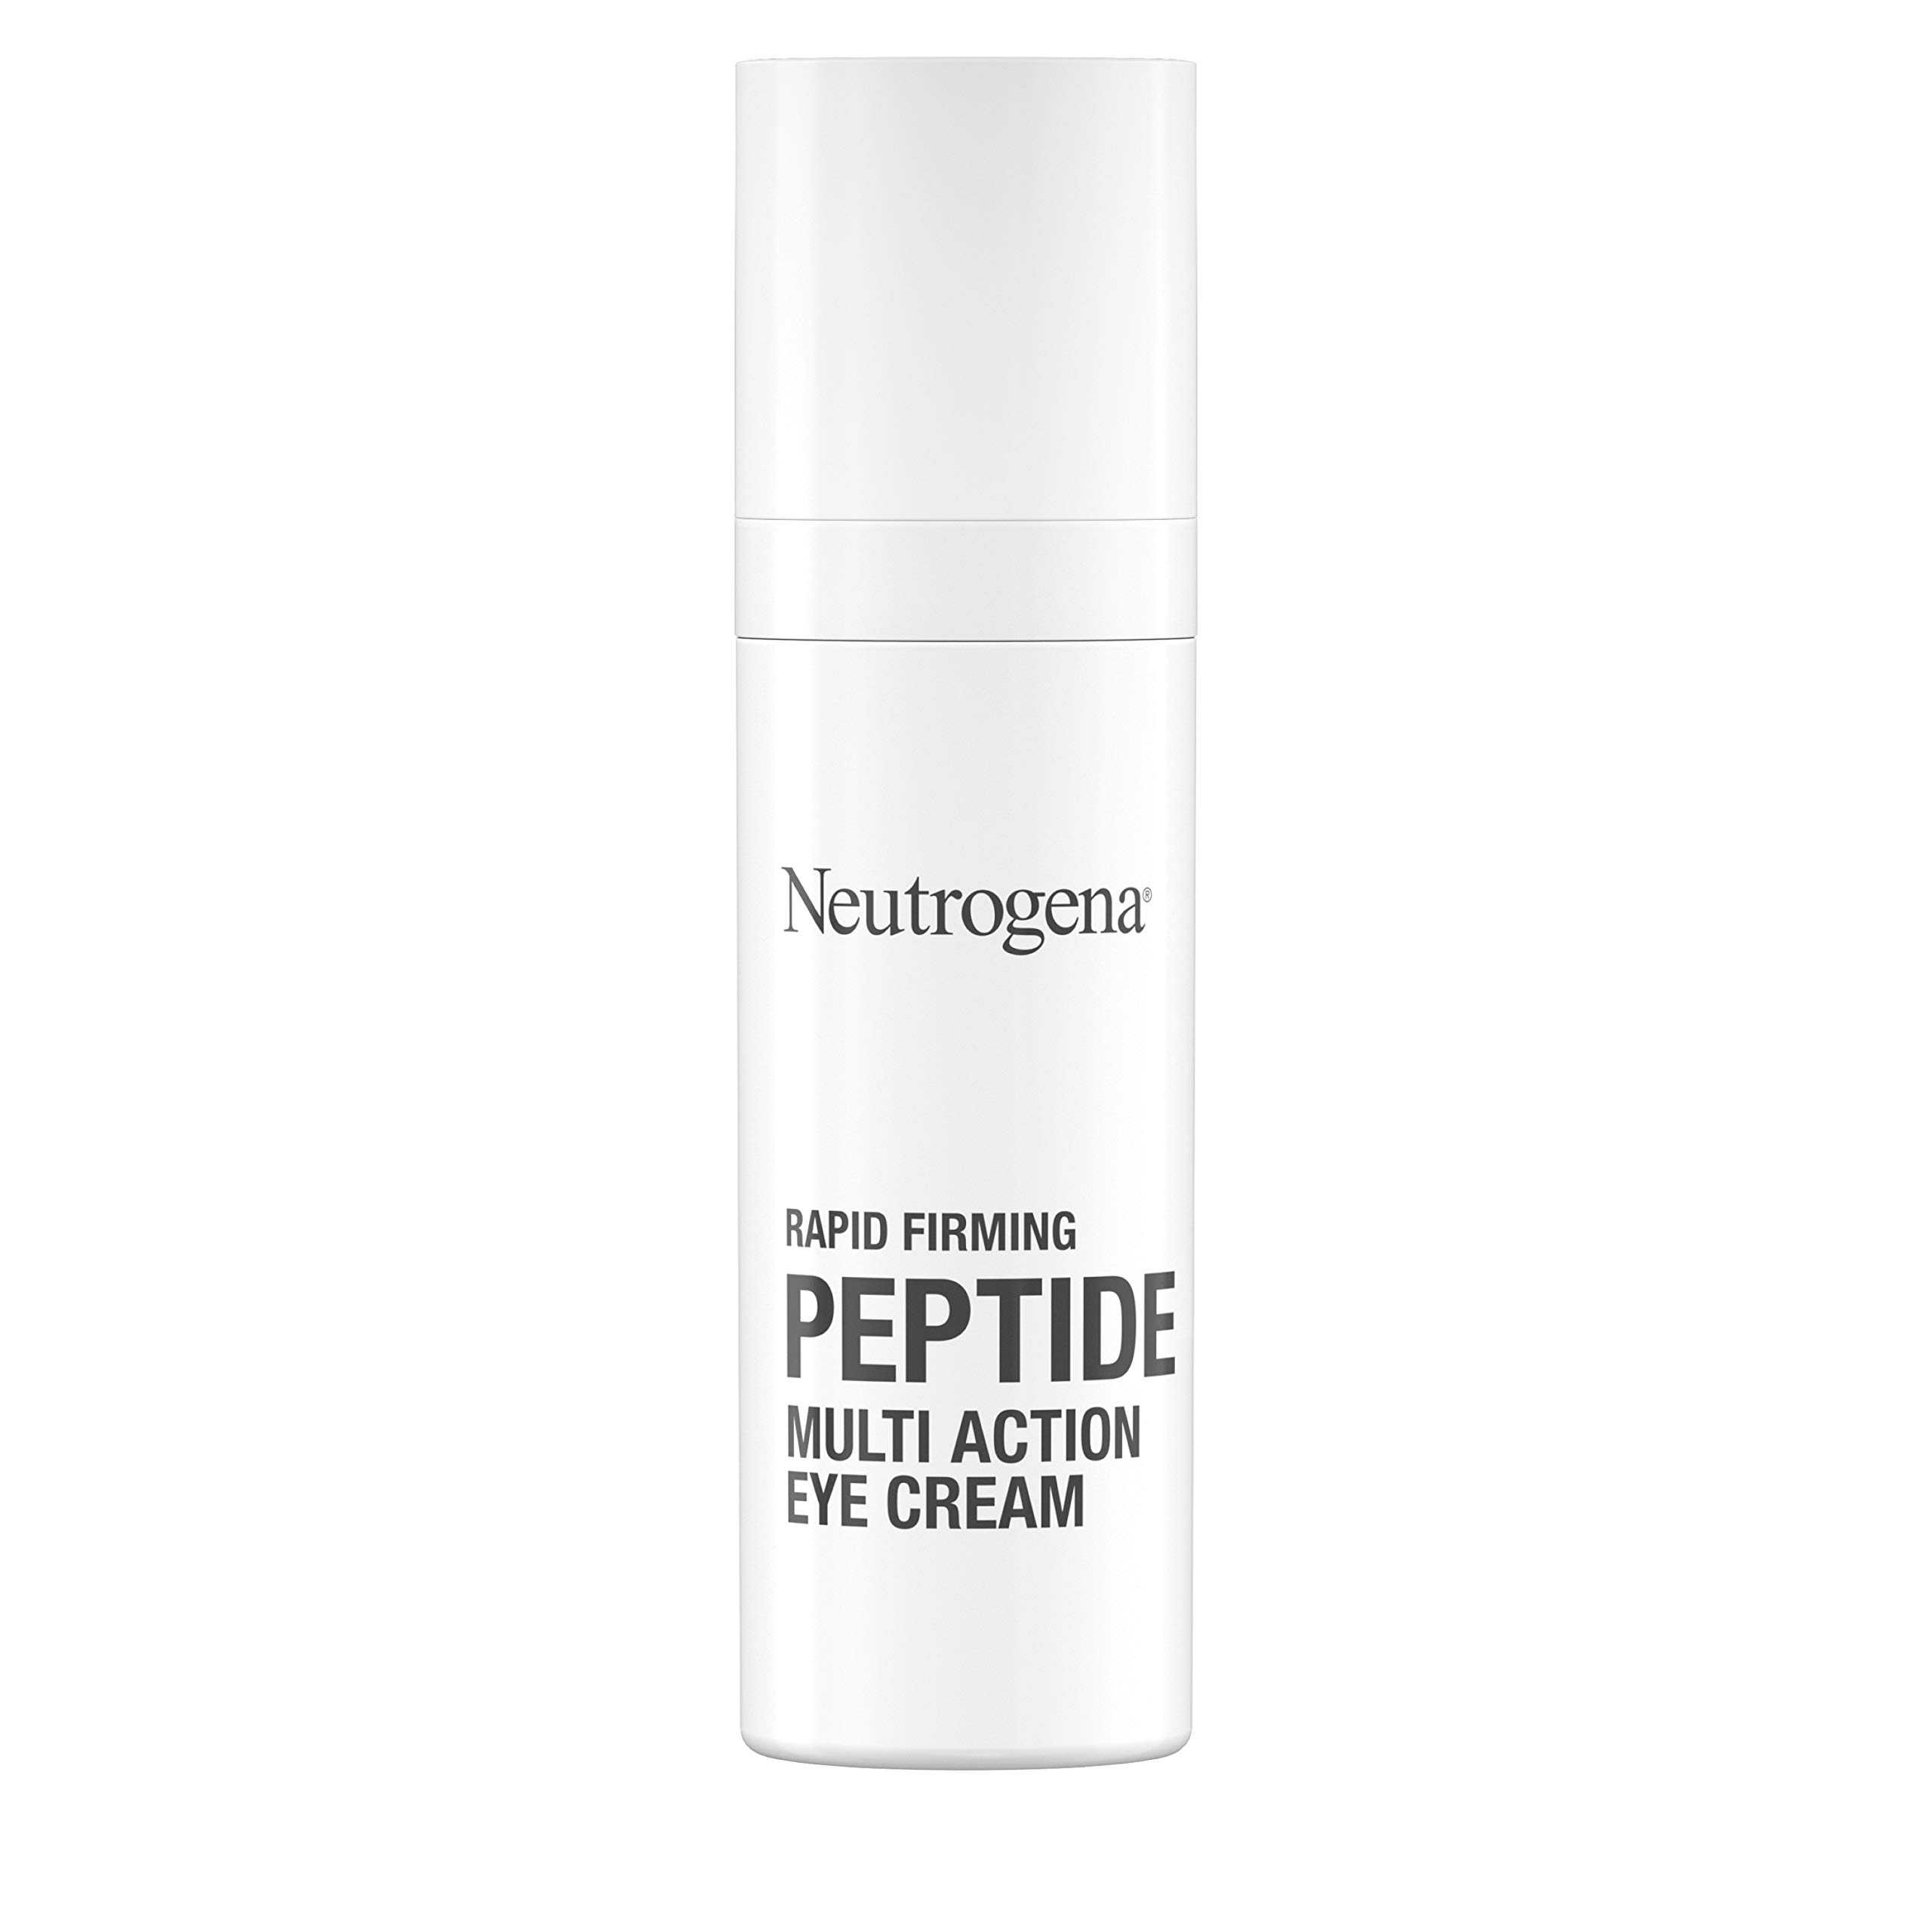 Neutrogena Rapid Firming Peptide Multi Action Depuffing & Brightening Eye Cream, Hydrating & Fragrance-Free Eye Firming Cream to visibly Reduce Fine Lines & Puffiness, 0.5 fl. oz (Pack of 4)